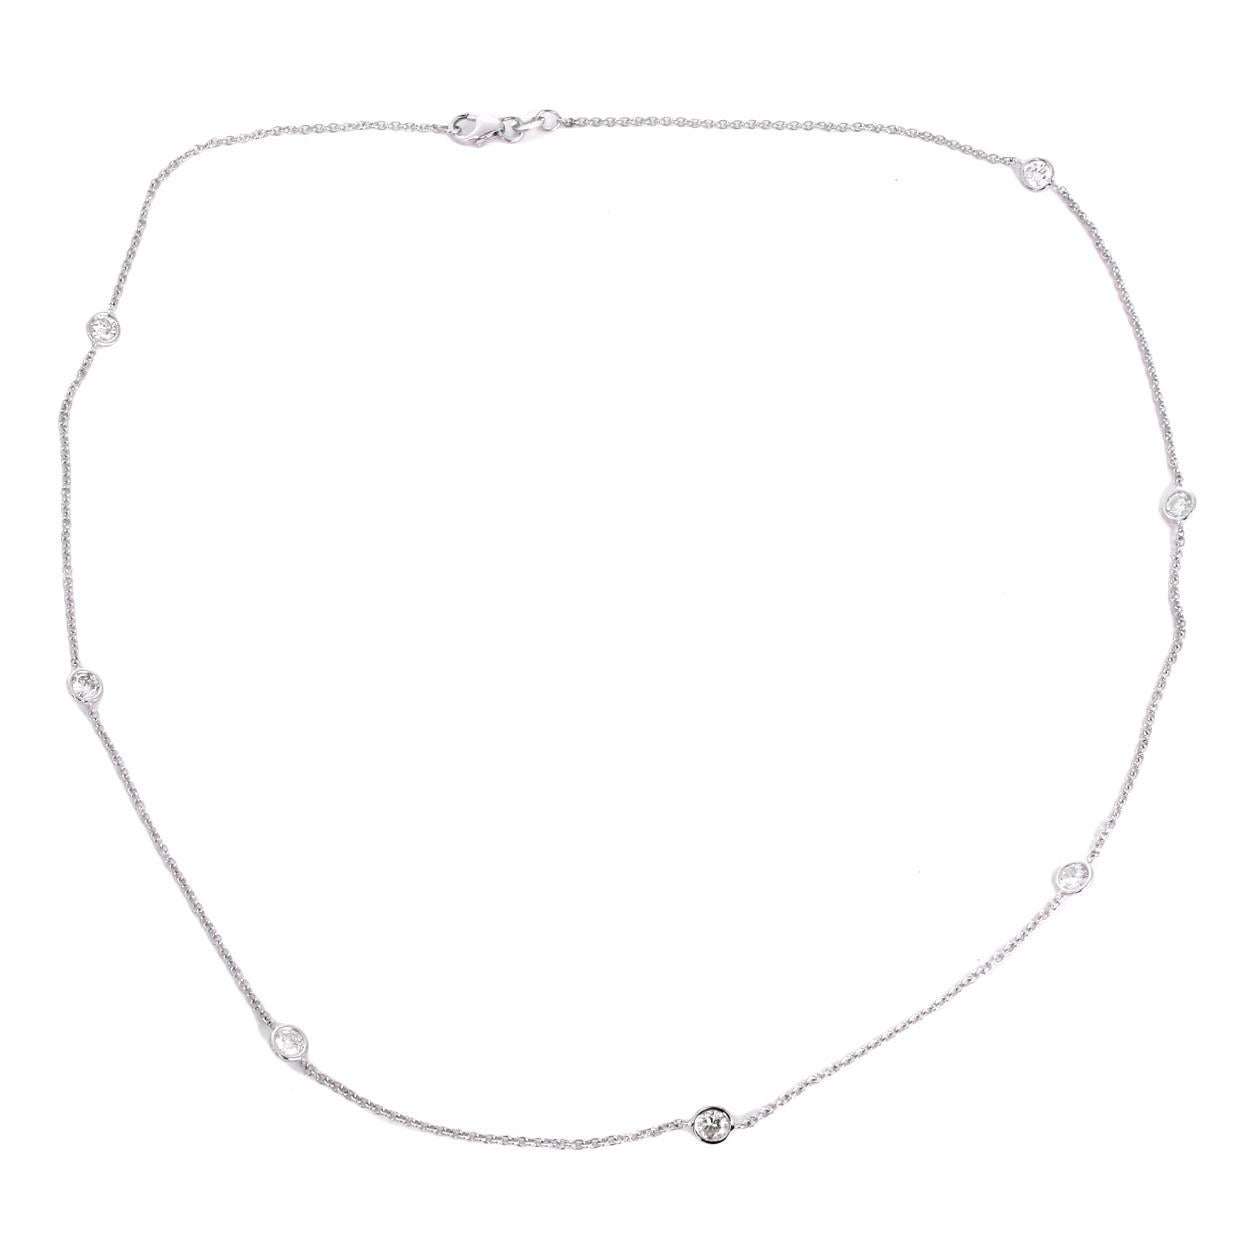 Stunning White Gold 1.69 ct. Diamond by the Yard Necklace